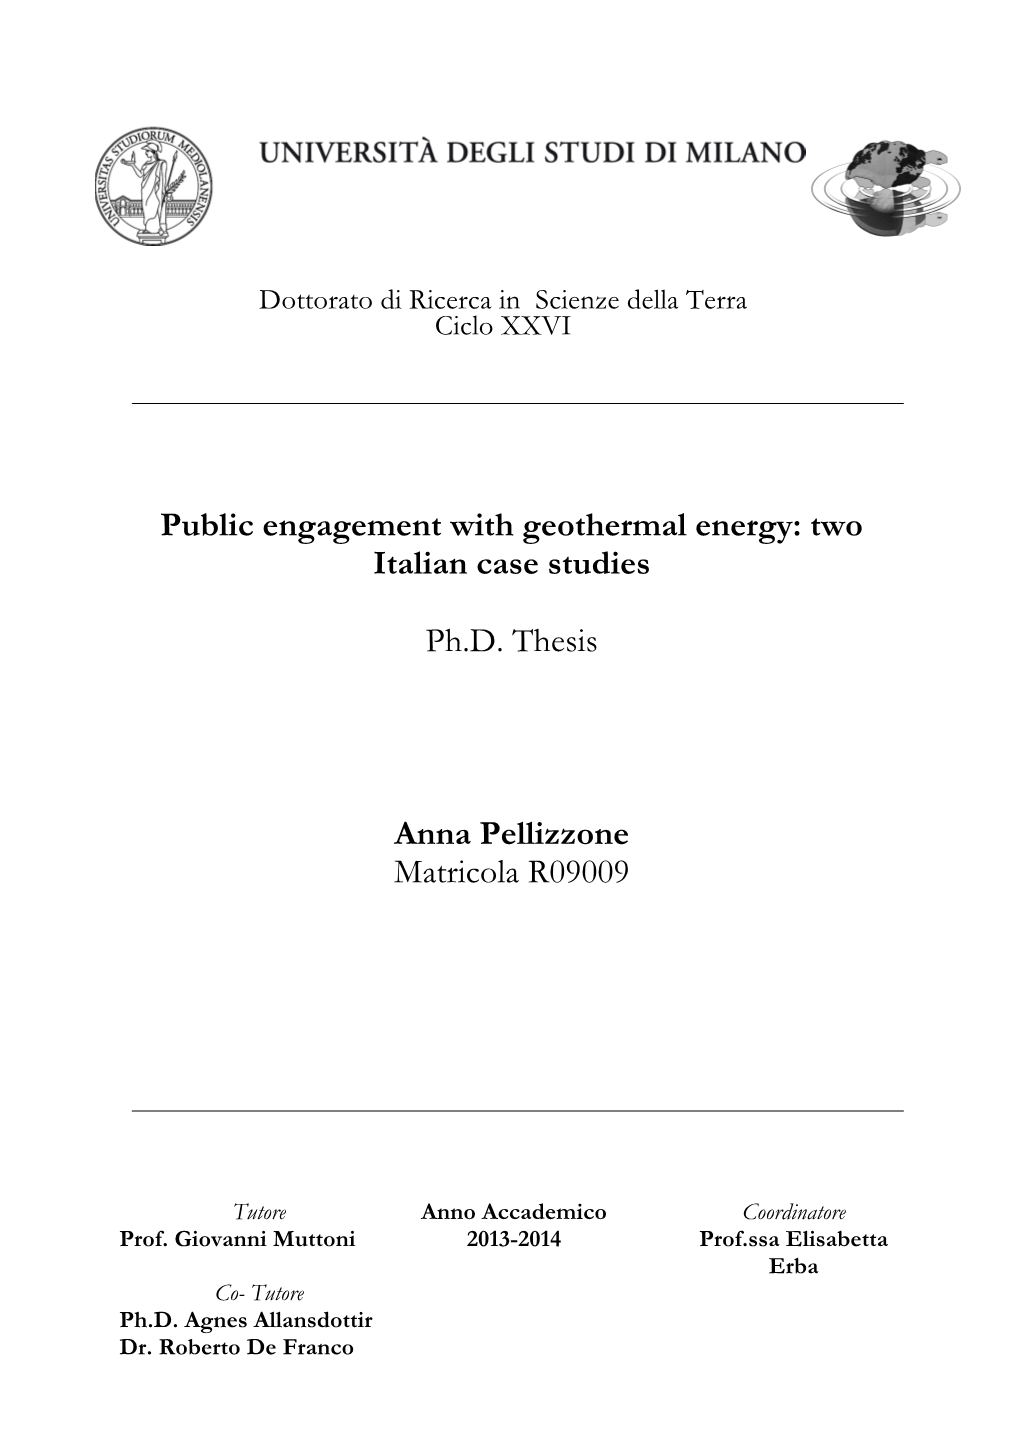 Public Engagement with Geothermal Energy: Two Italian Case Studies Ph